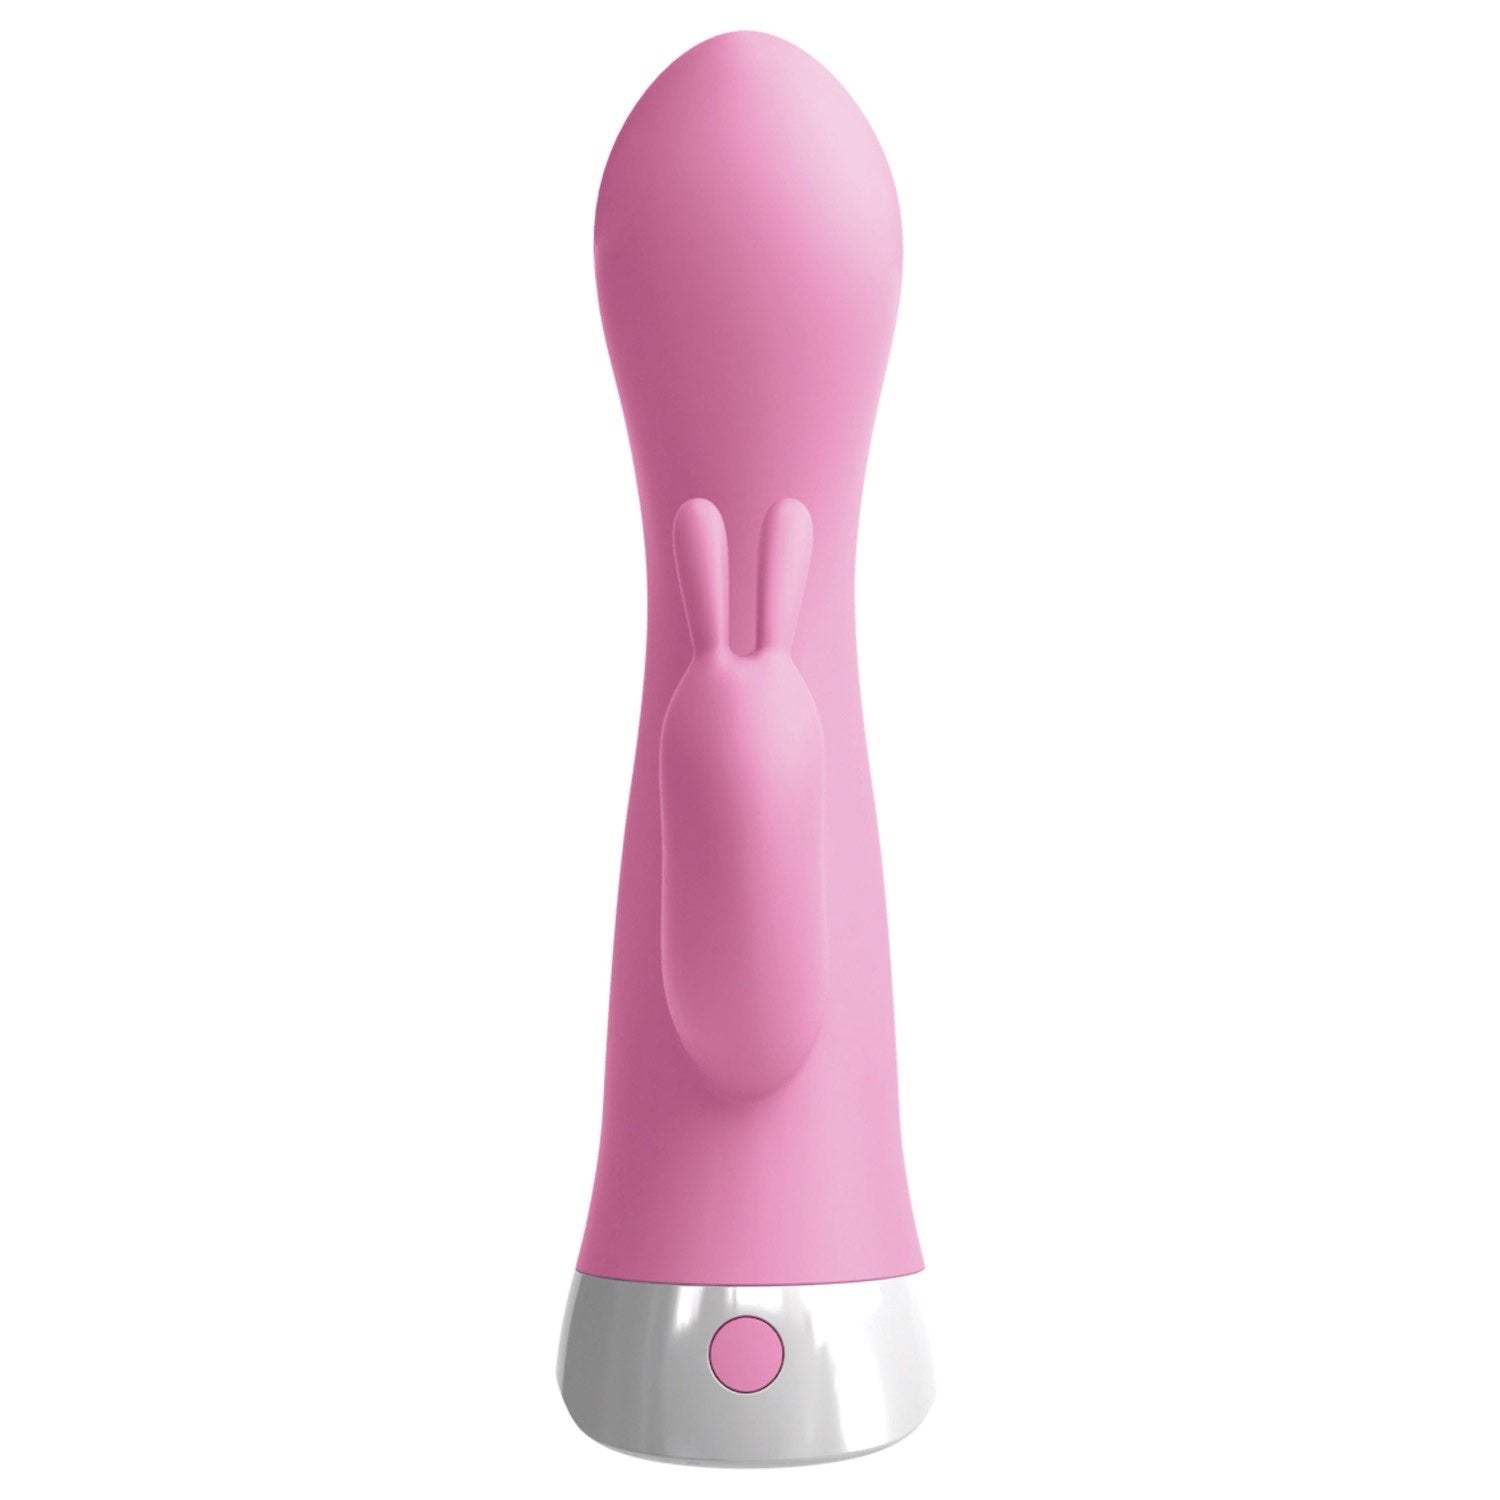 3Some Wall Banger Rabbit - Pink USB Rechargeable Rabbit Vibrator with Wireless Remote by Pipedream